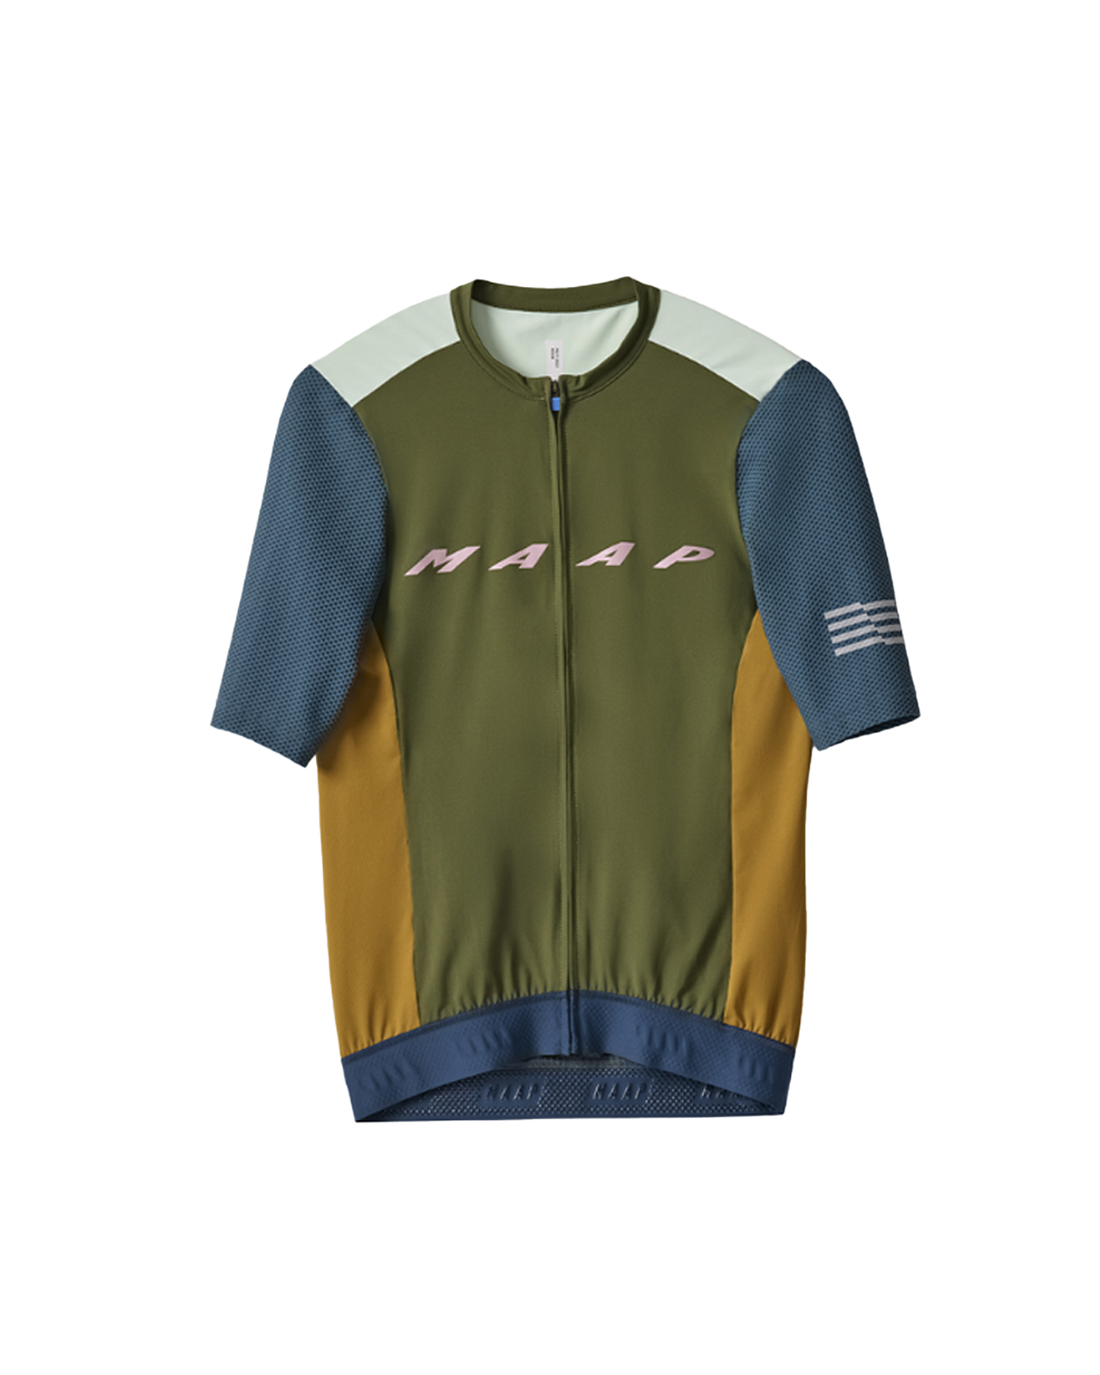 Evade Off Cuts Pro Jersey - Military